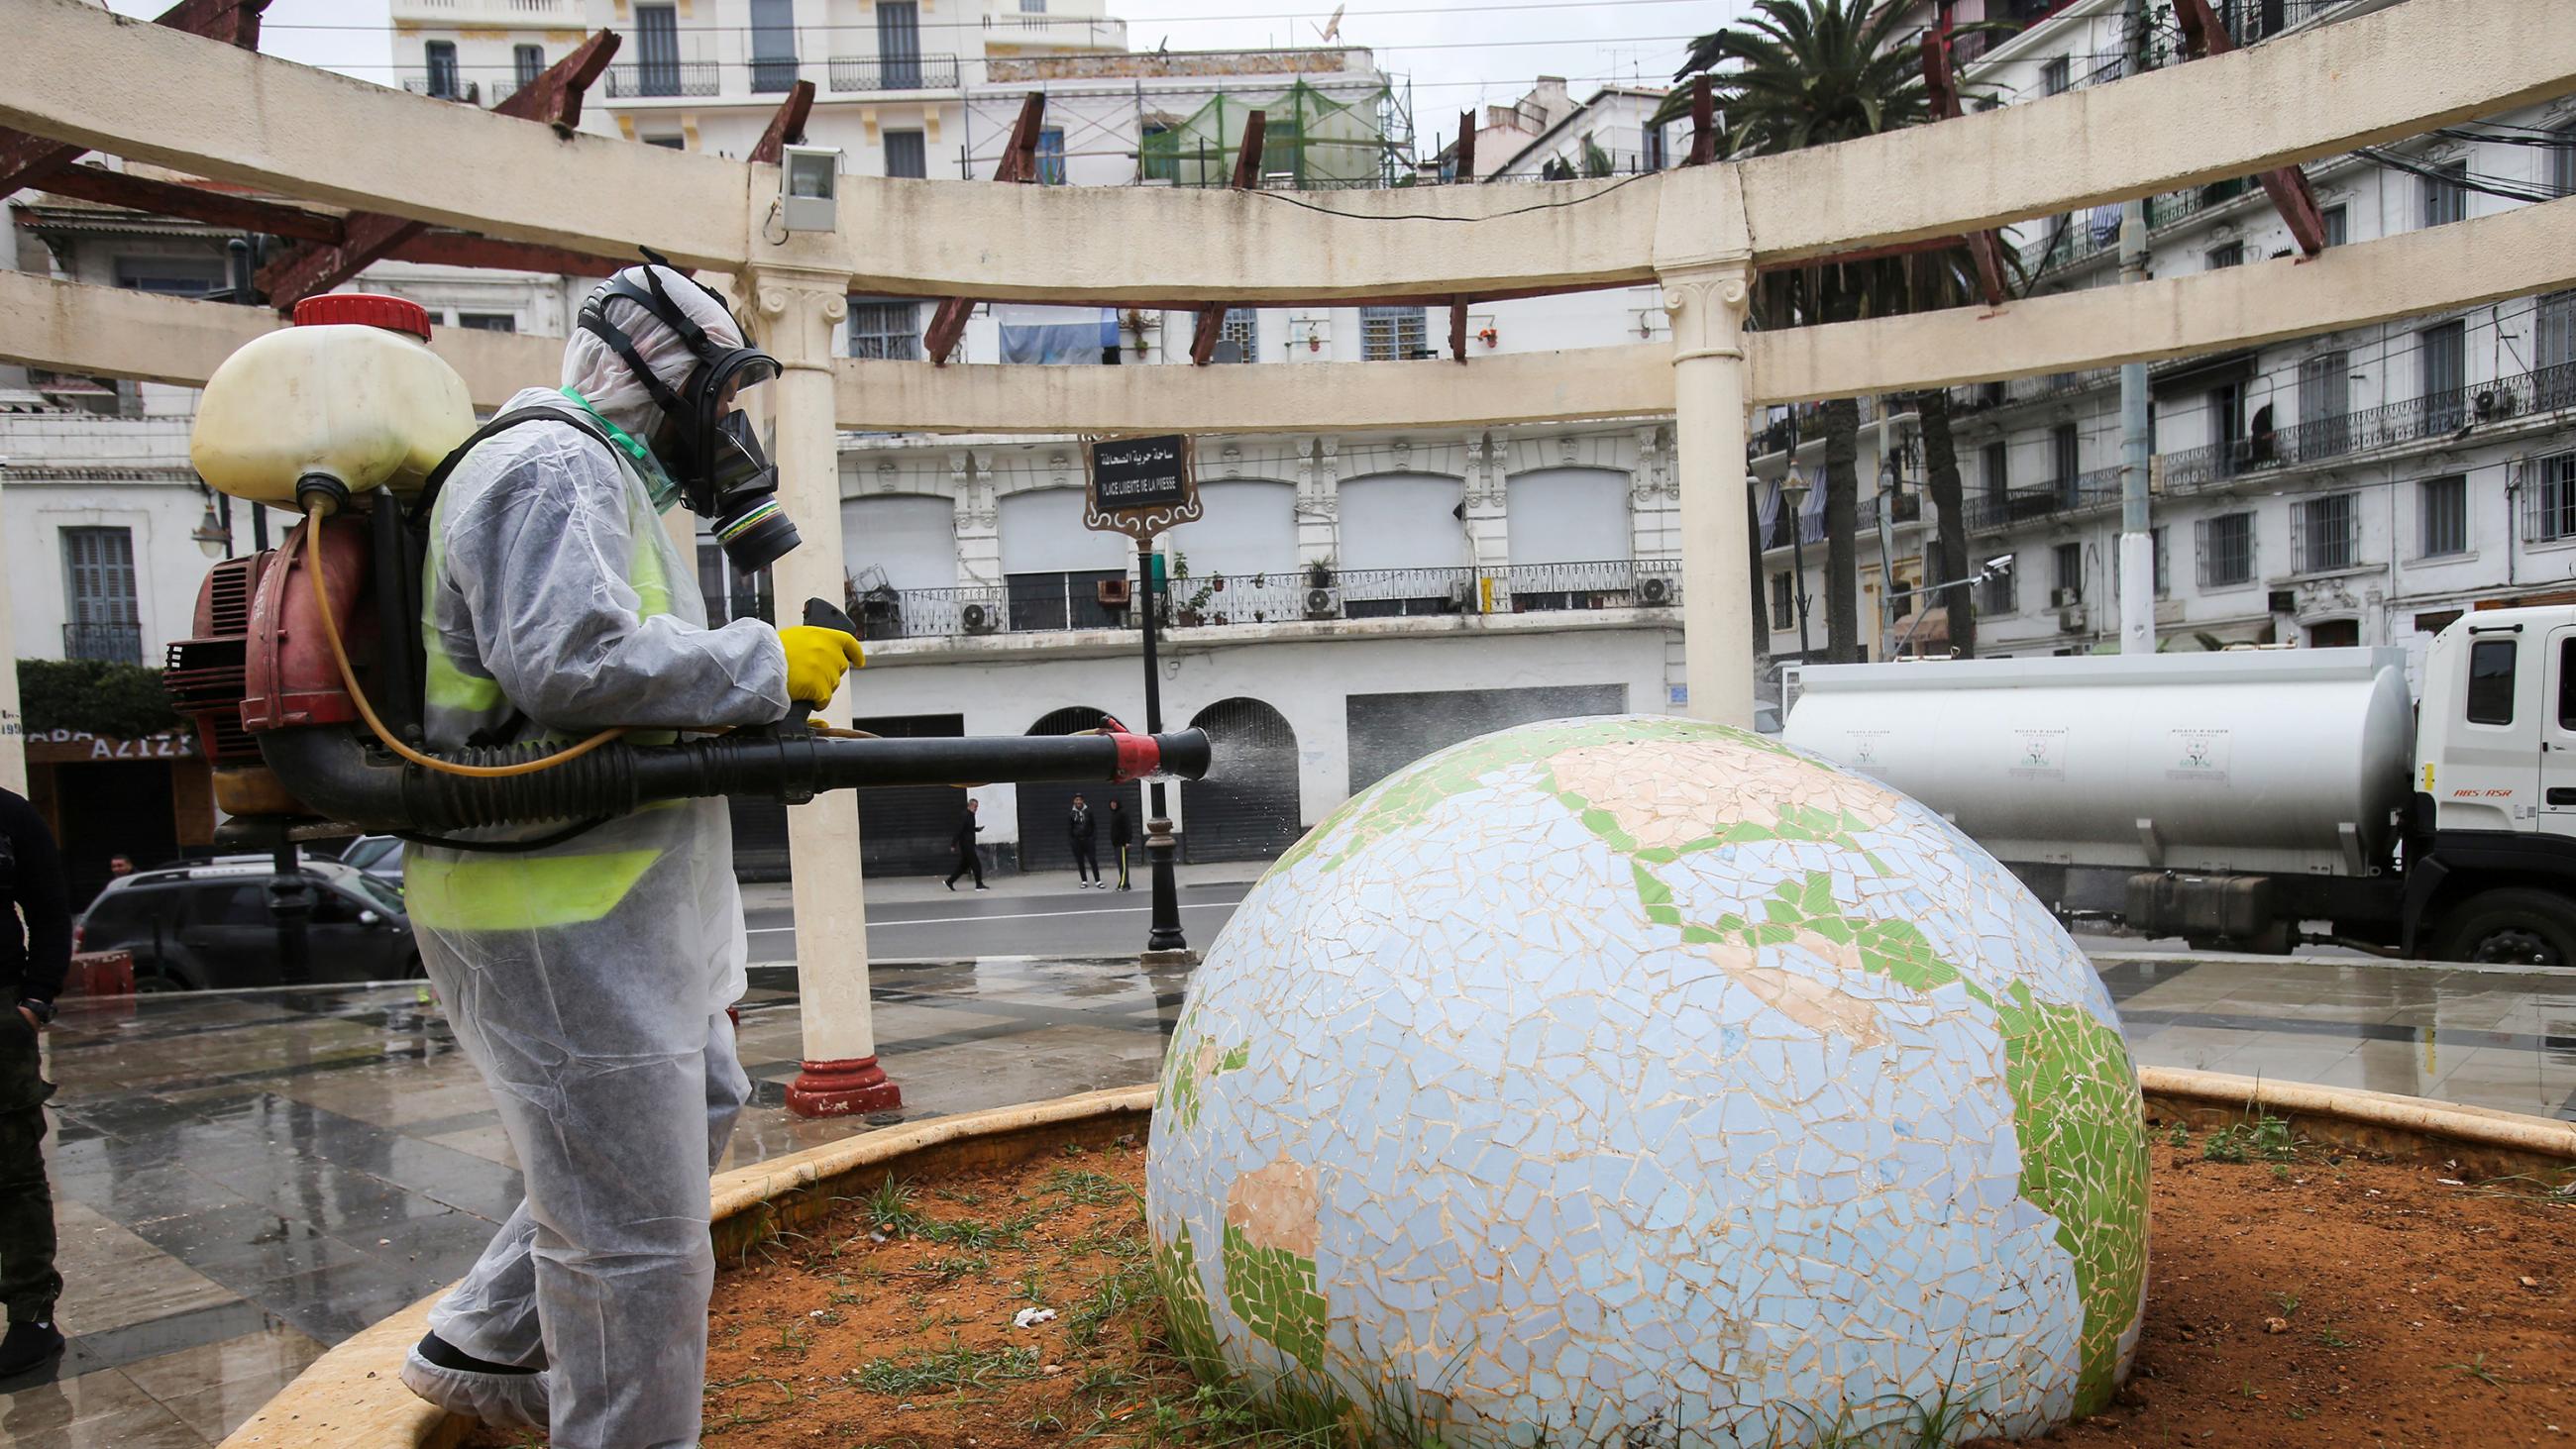 This is a bizarre photo showing the worker in a protective space suit spraying a large, fancy globe sculpture in the center of an open-air atrium. 